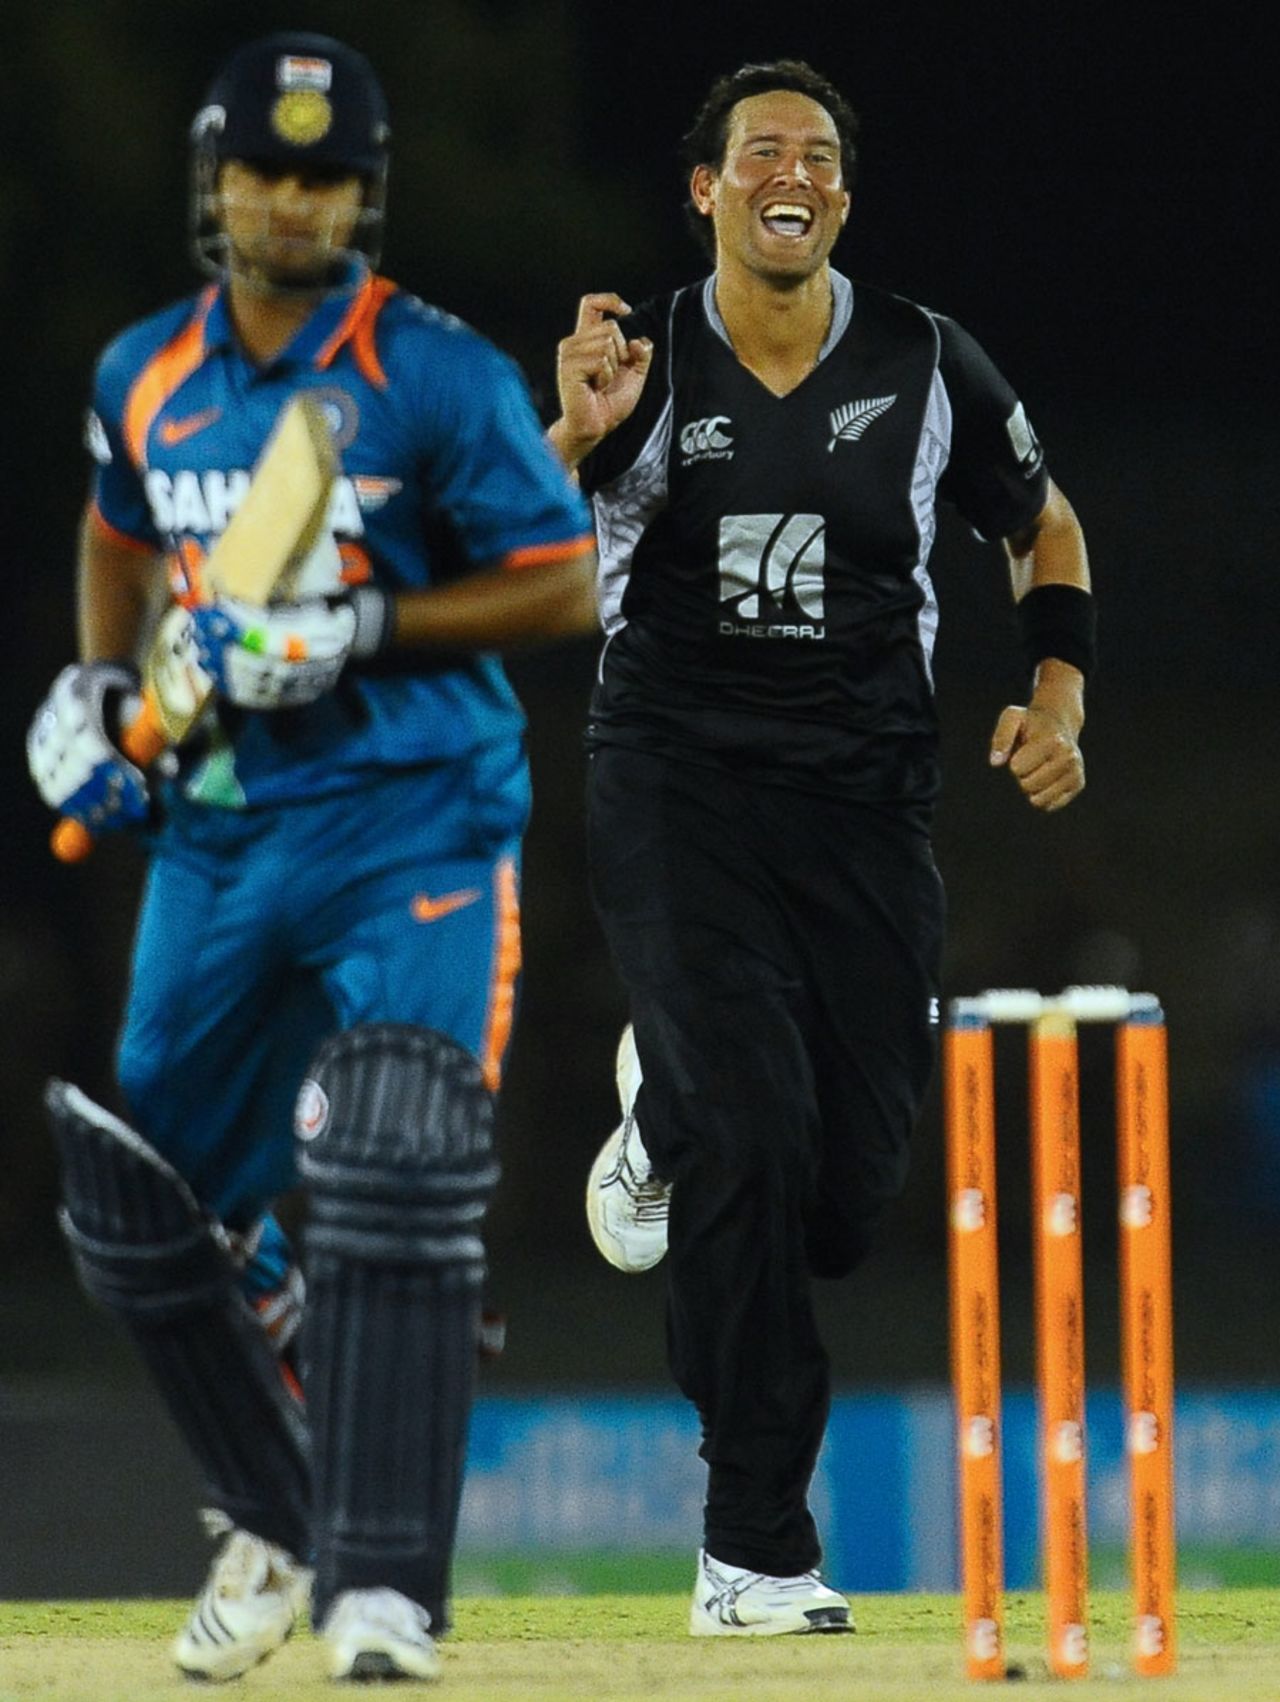 Daryl Tuffey is delighted after dismissing Suresh Raina, India v New Zealand, tri-series, 1st ODI, August 10, 2010